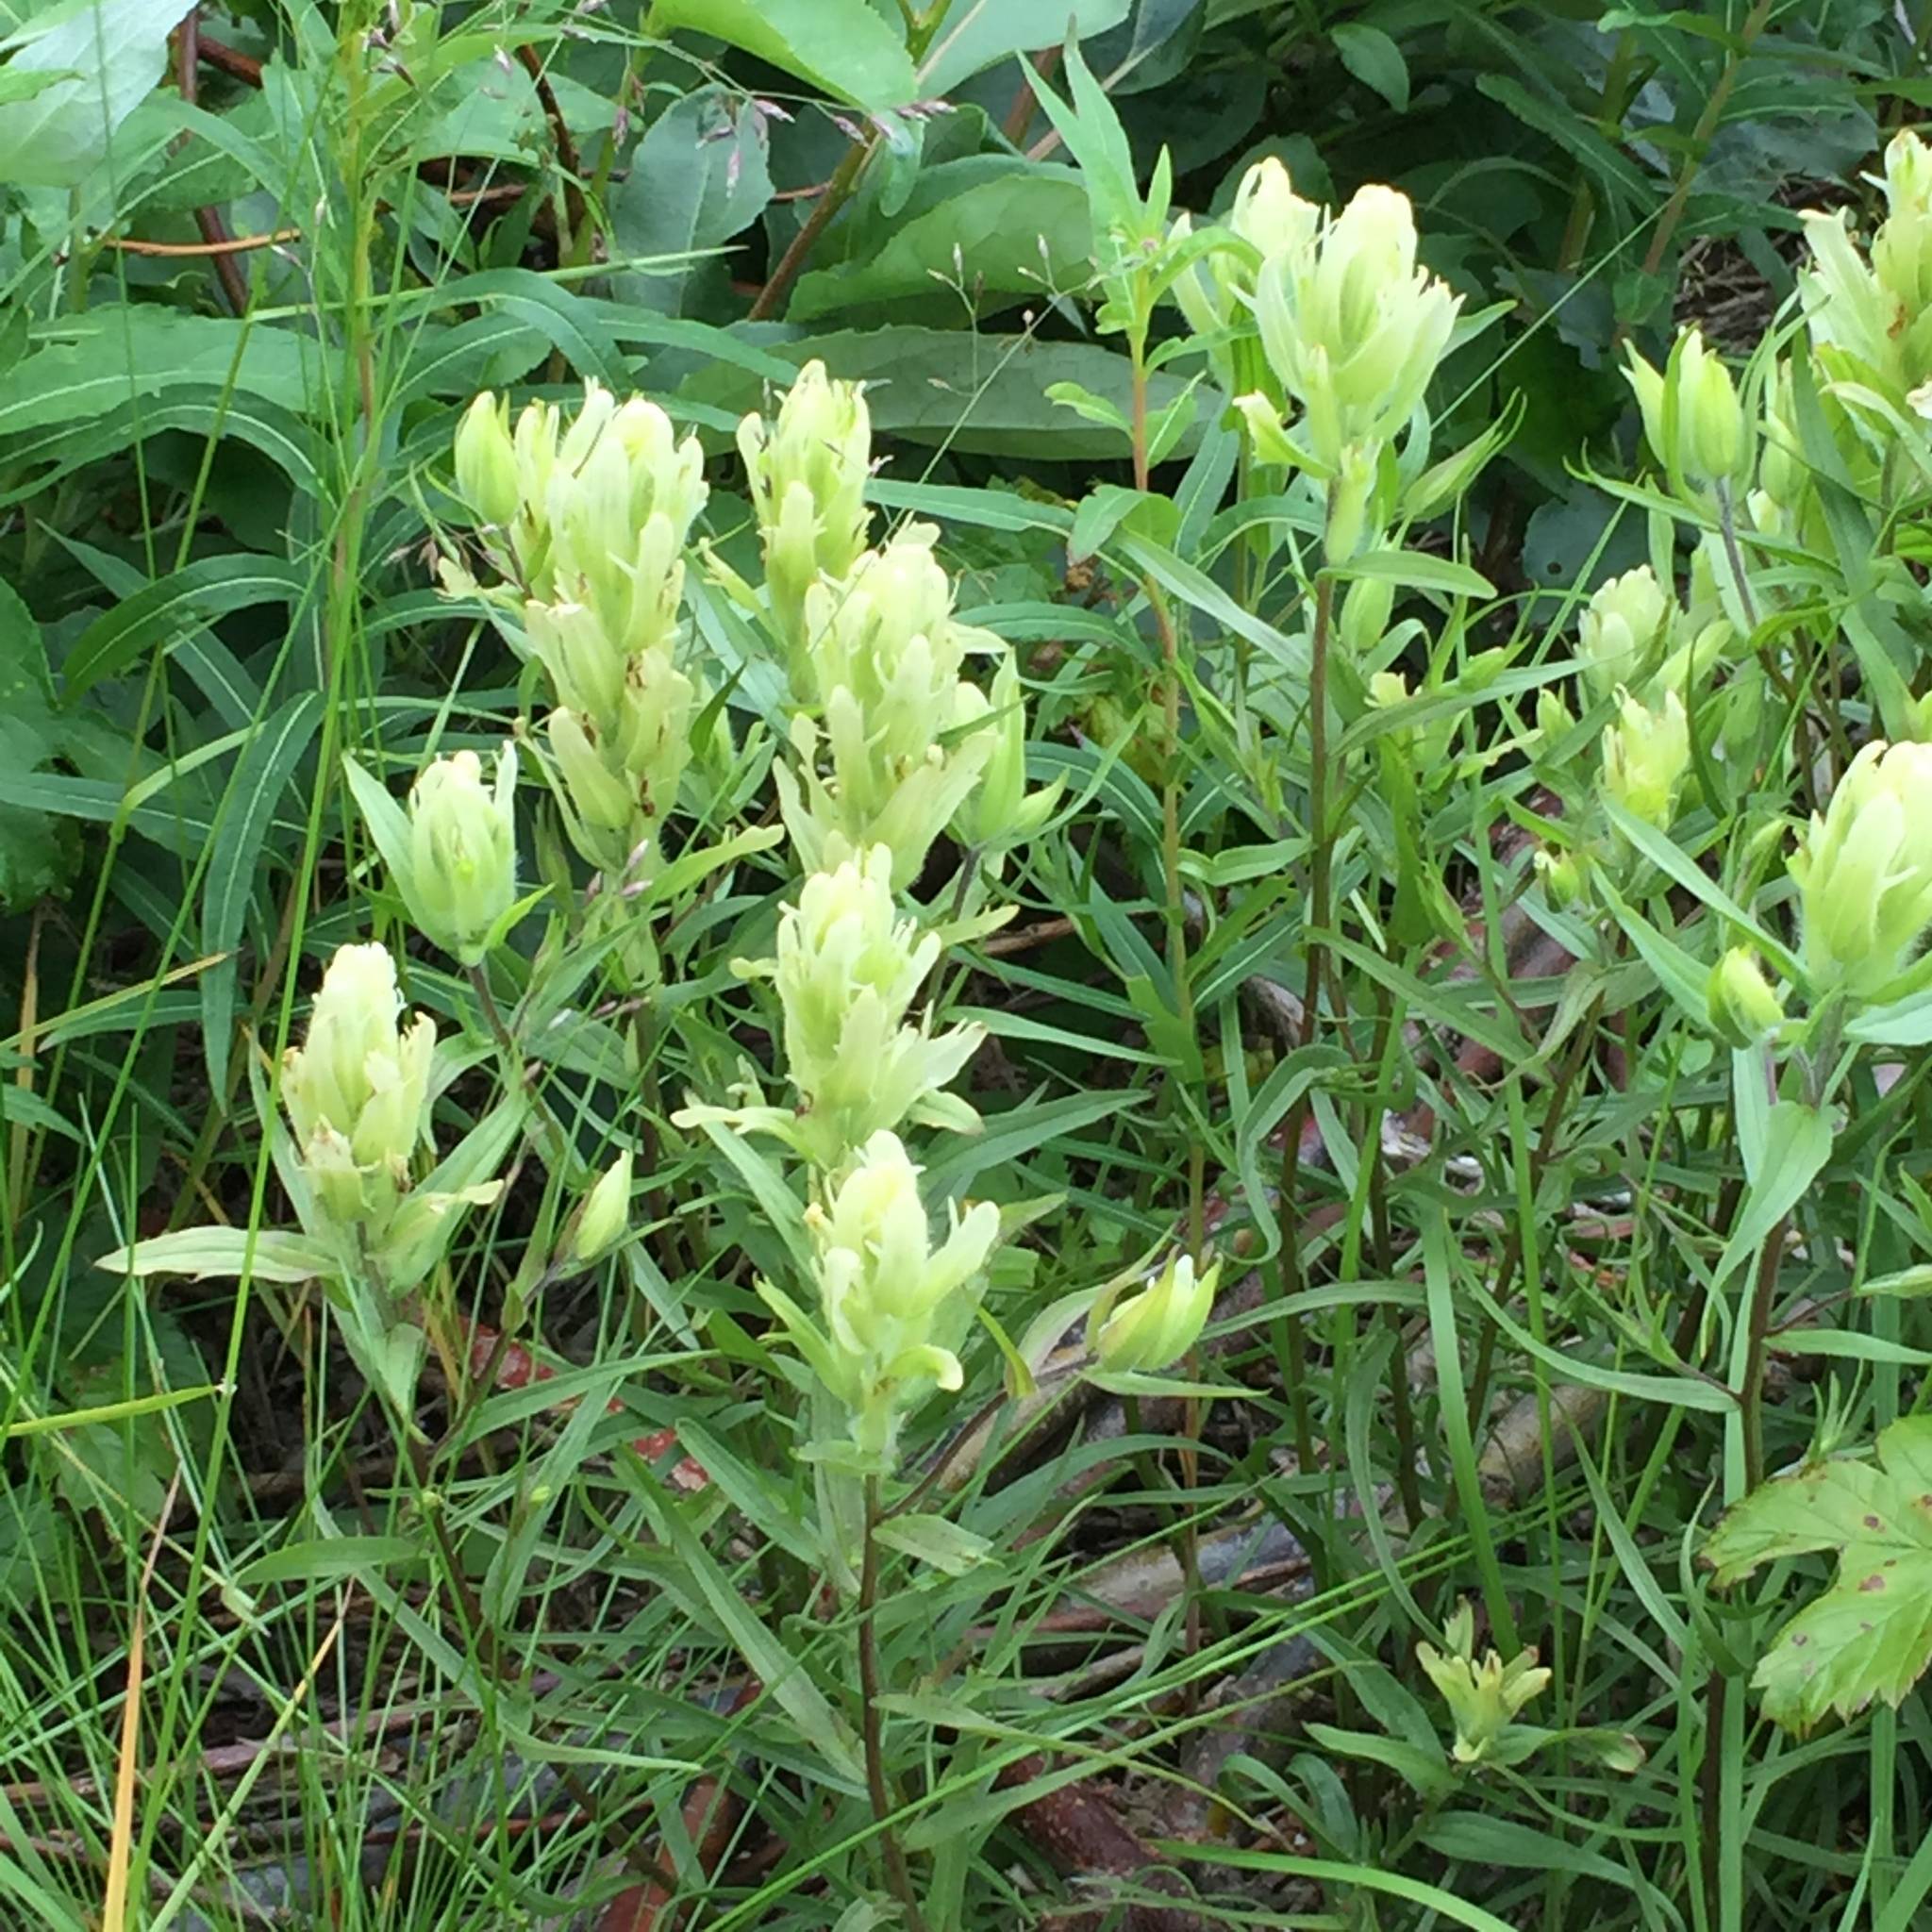 light-yellow flowers with green leaves and green-brown stems